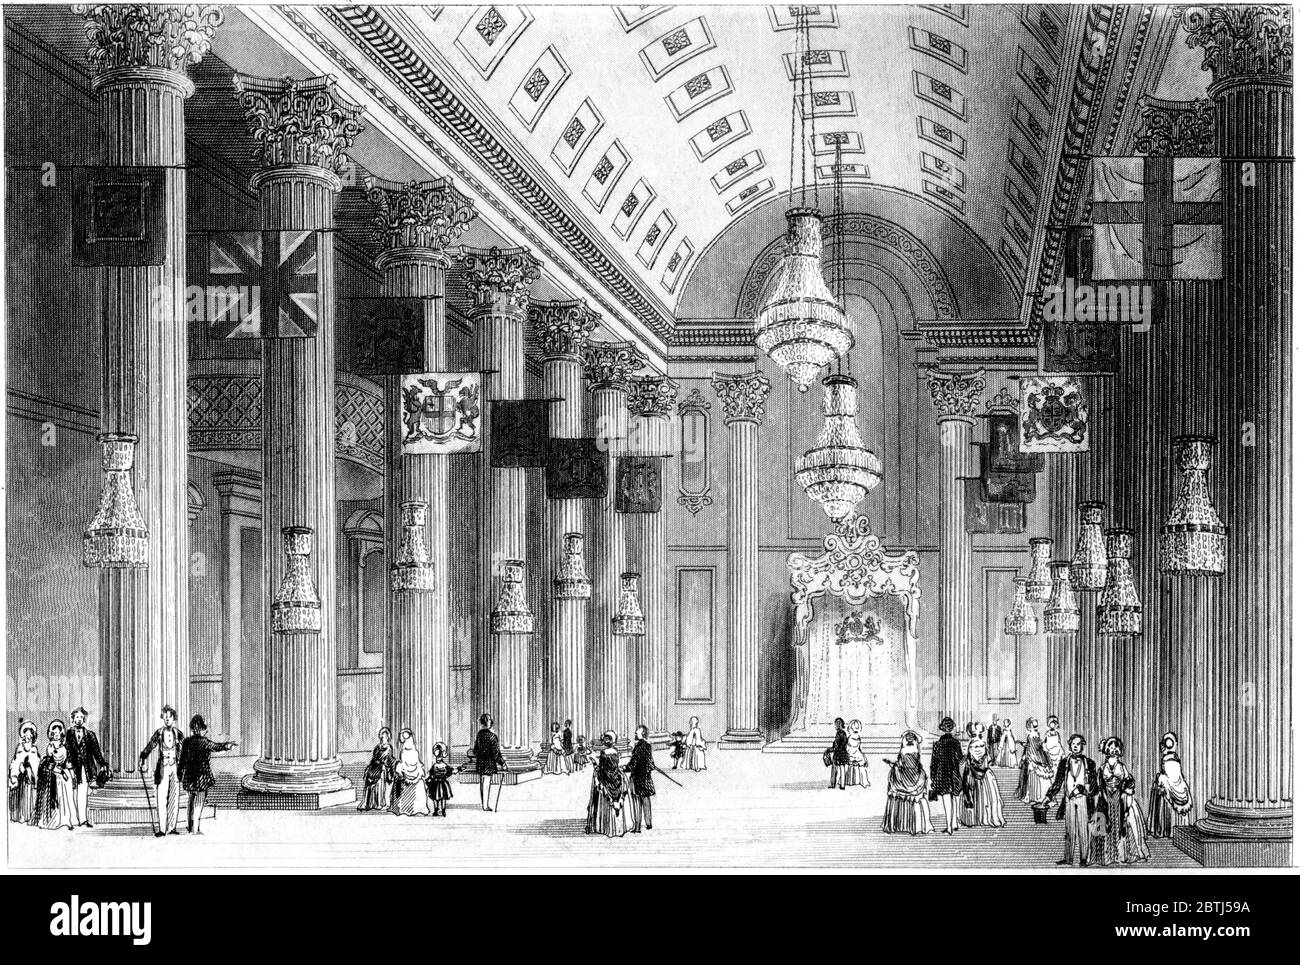 An engraving of The Egyptian Hall, Mansion House, London scanned at high resolution from a book printed in 1851.  Believed copyright free. Stock Photo